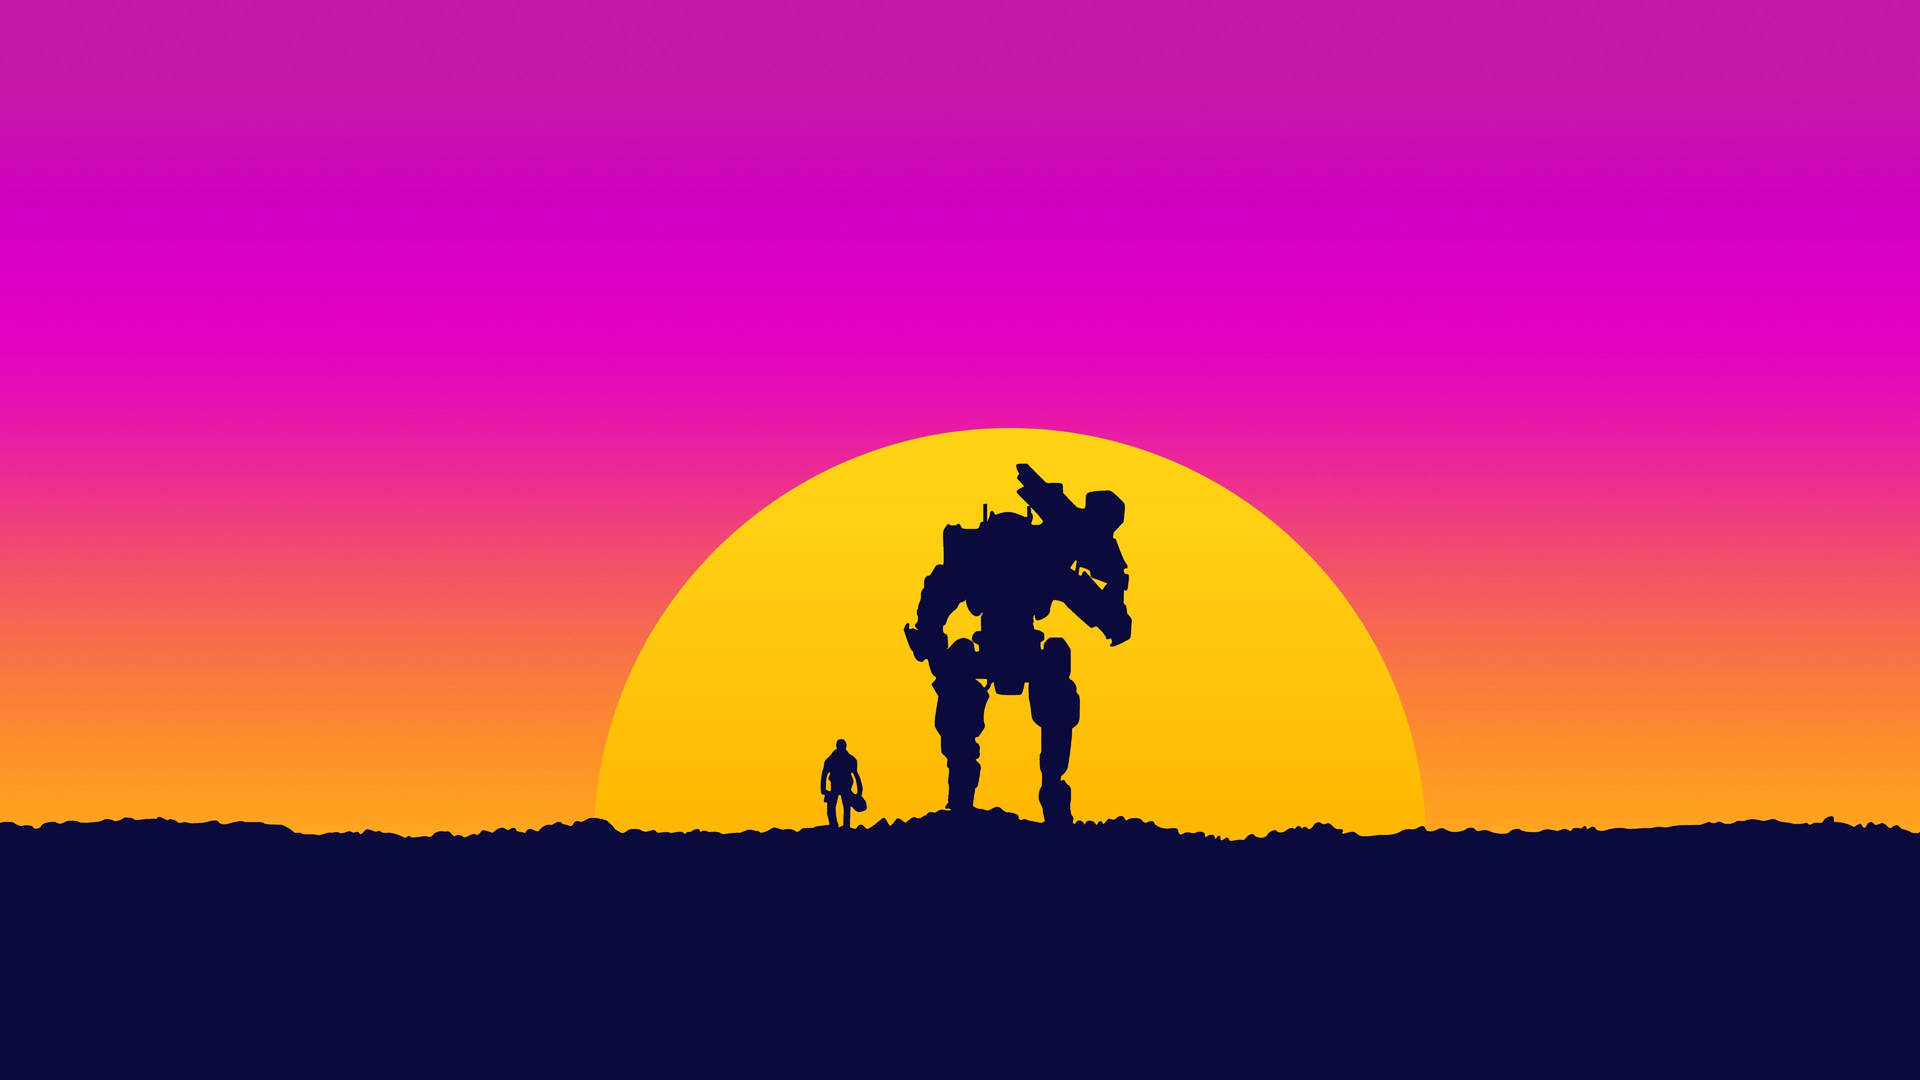 Man And Robot Gaming On Sunset Background